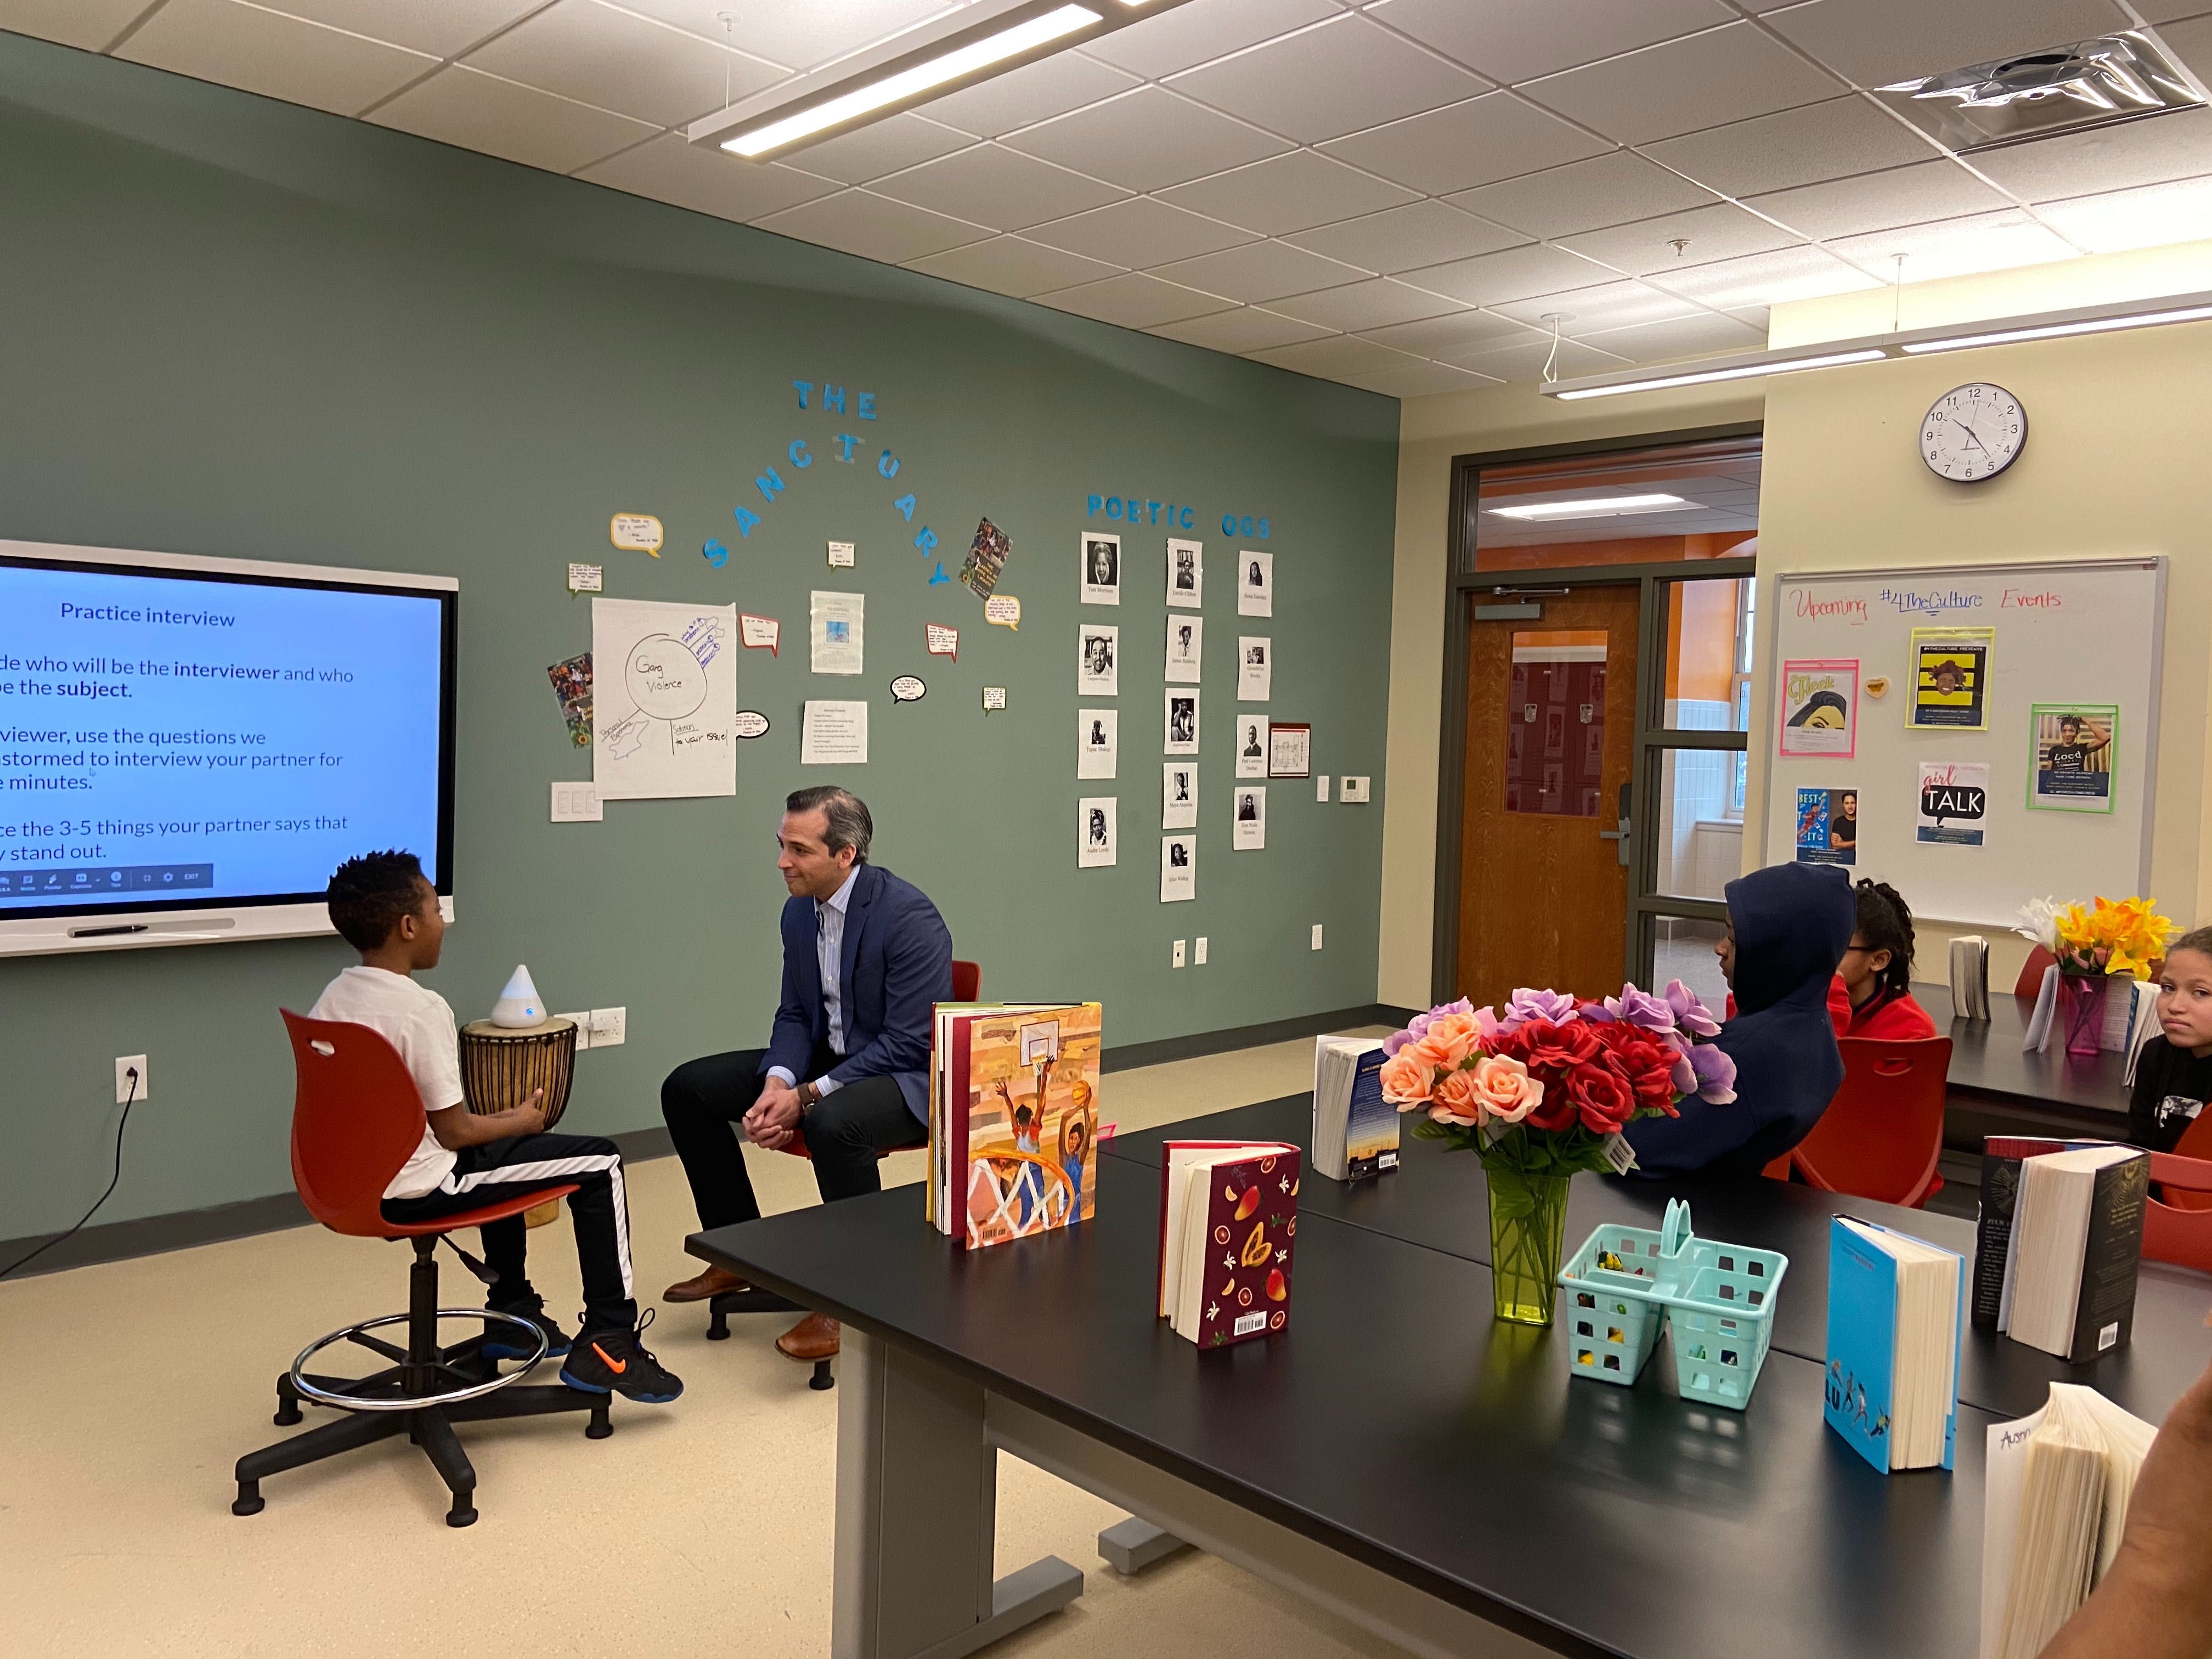 PBS NewsHour special correspondent Nick Schifrin works with a student during the post-field trip workshop at Ida B. Wells Middle School. Image by Pauline Werner. United States, 2020.